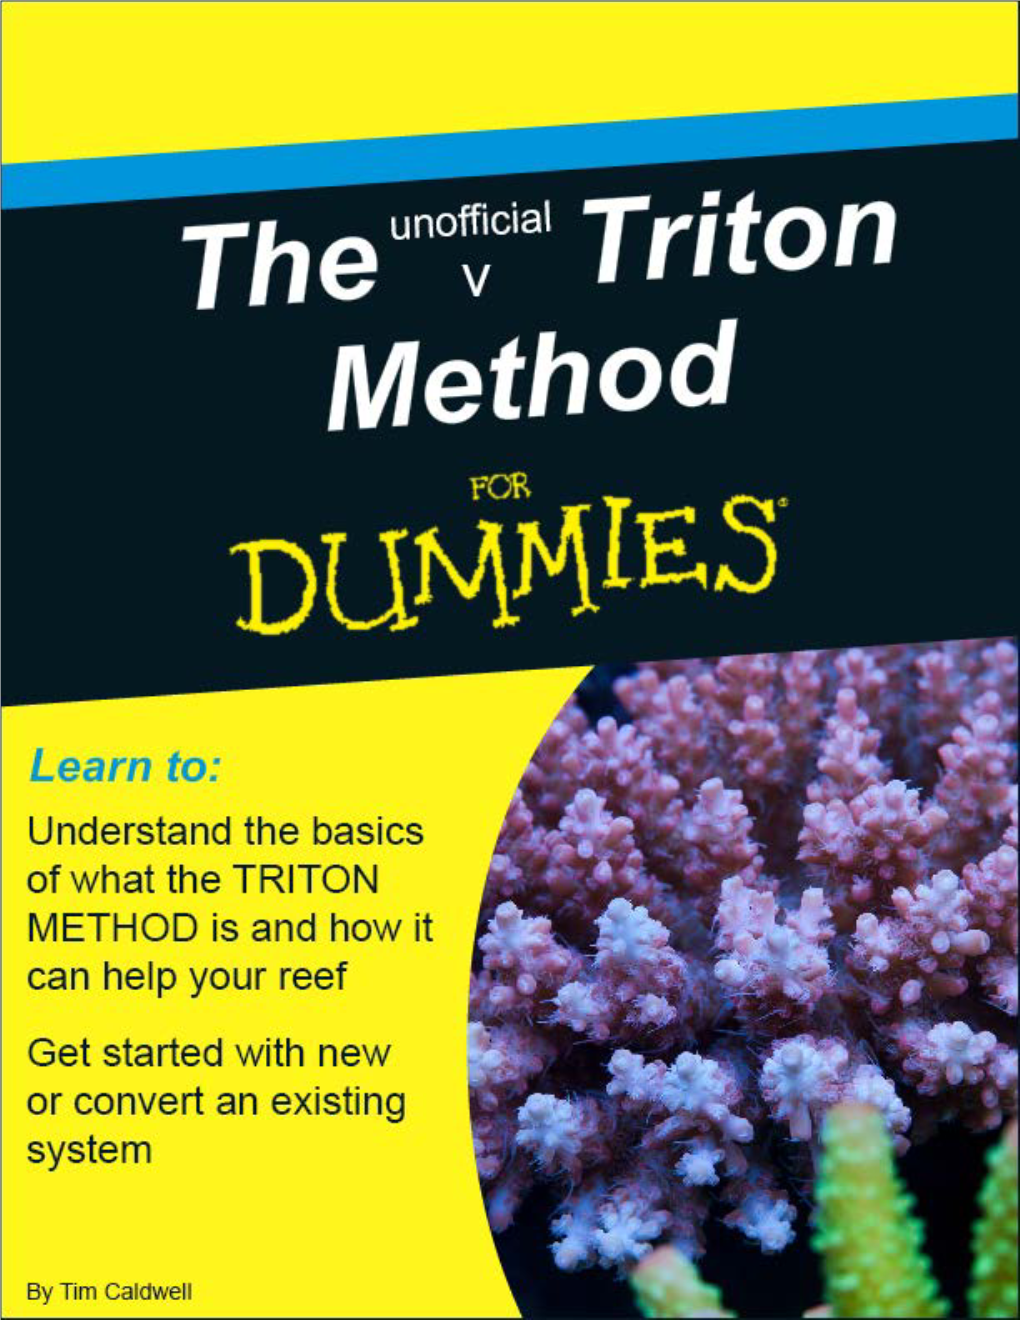 The Unofficial TRITON METHOD for Dummies Guide